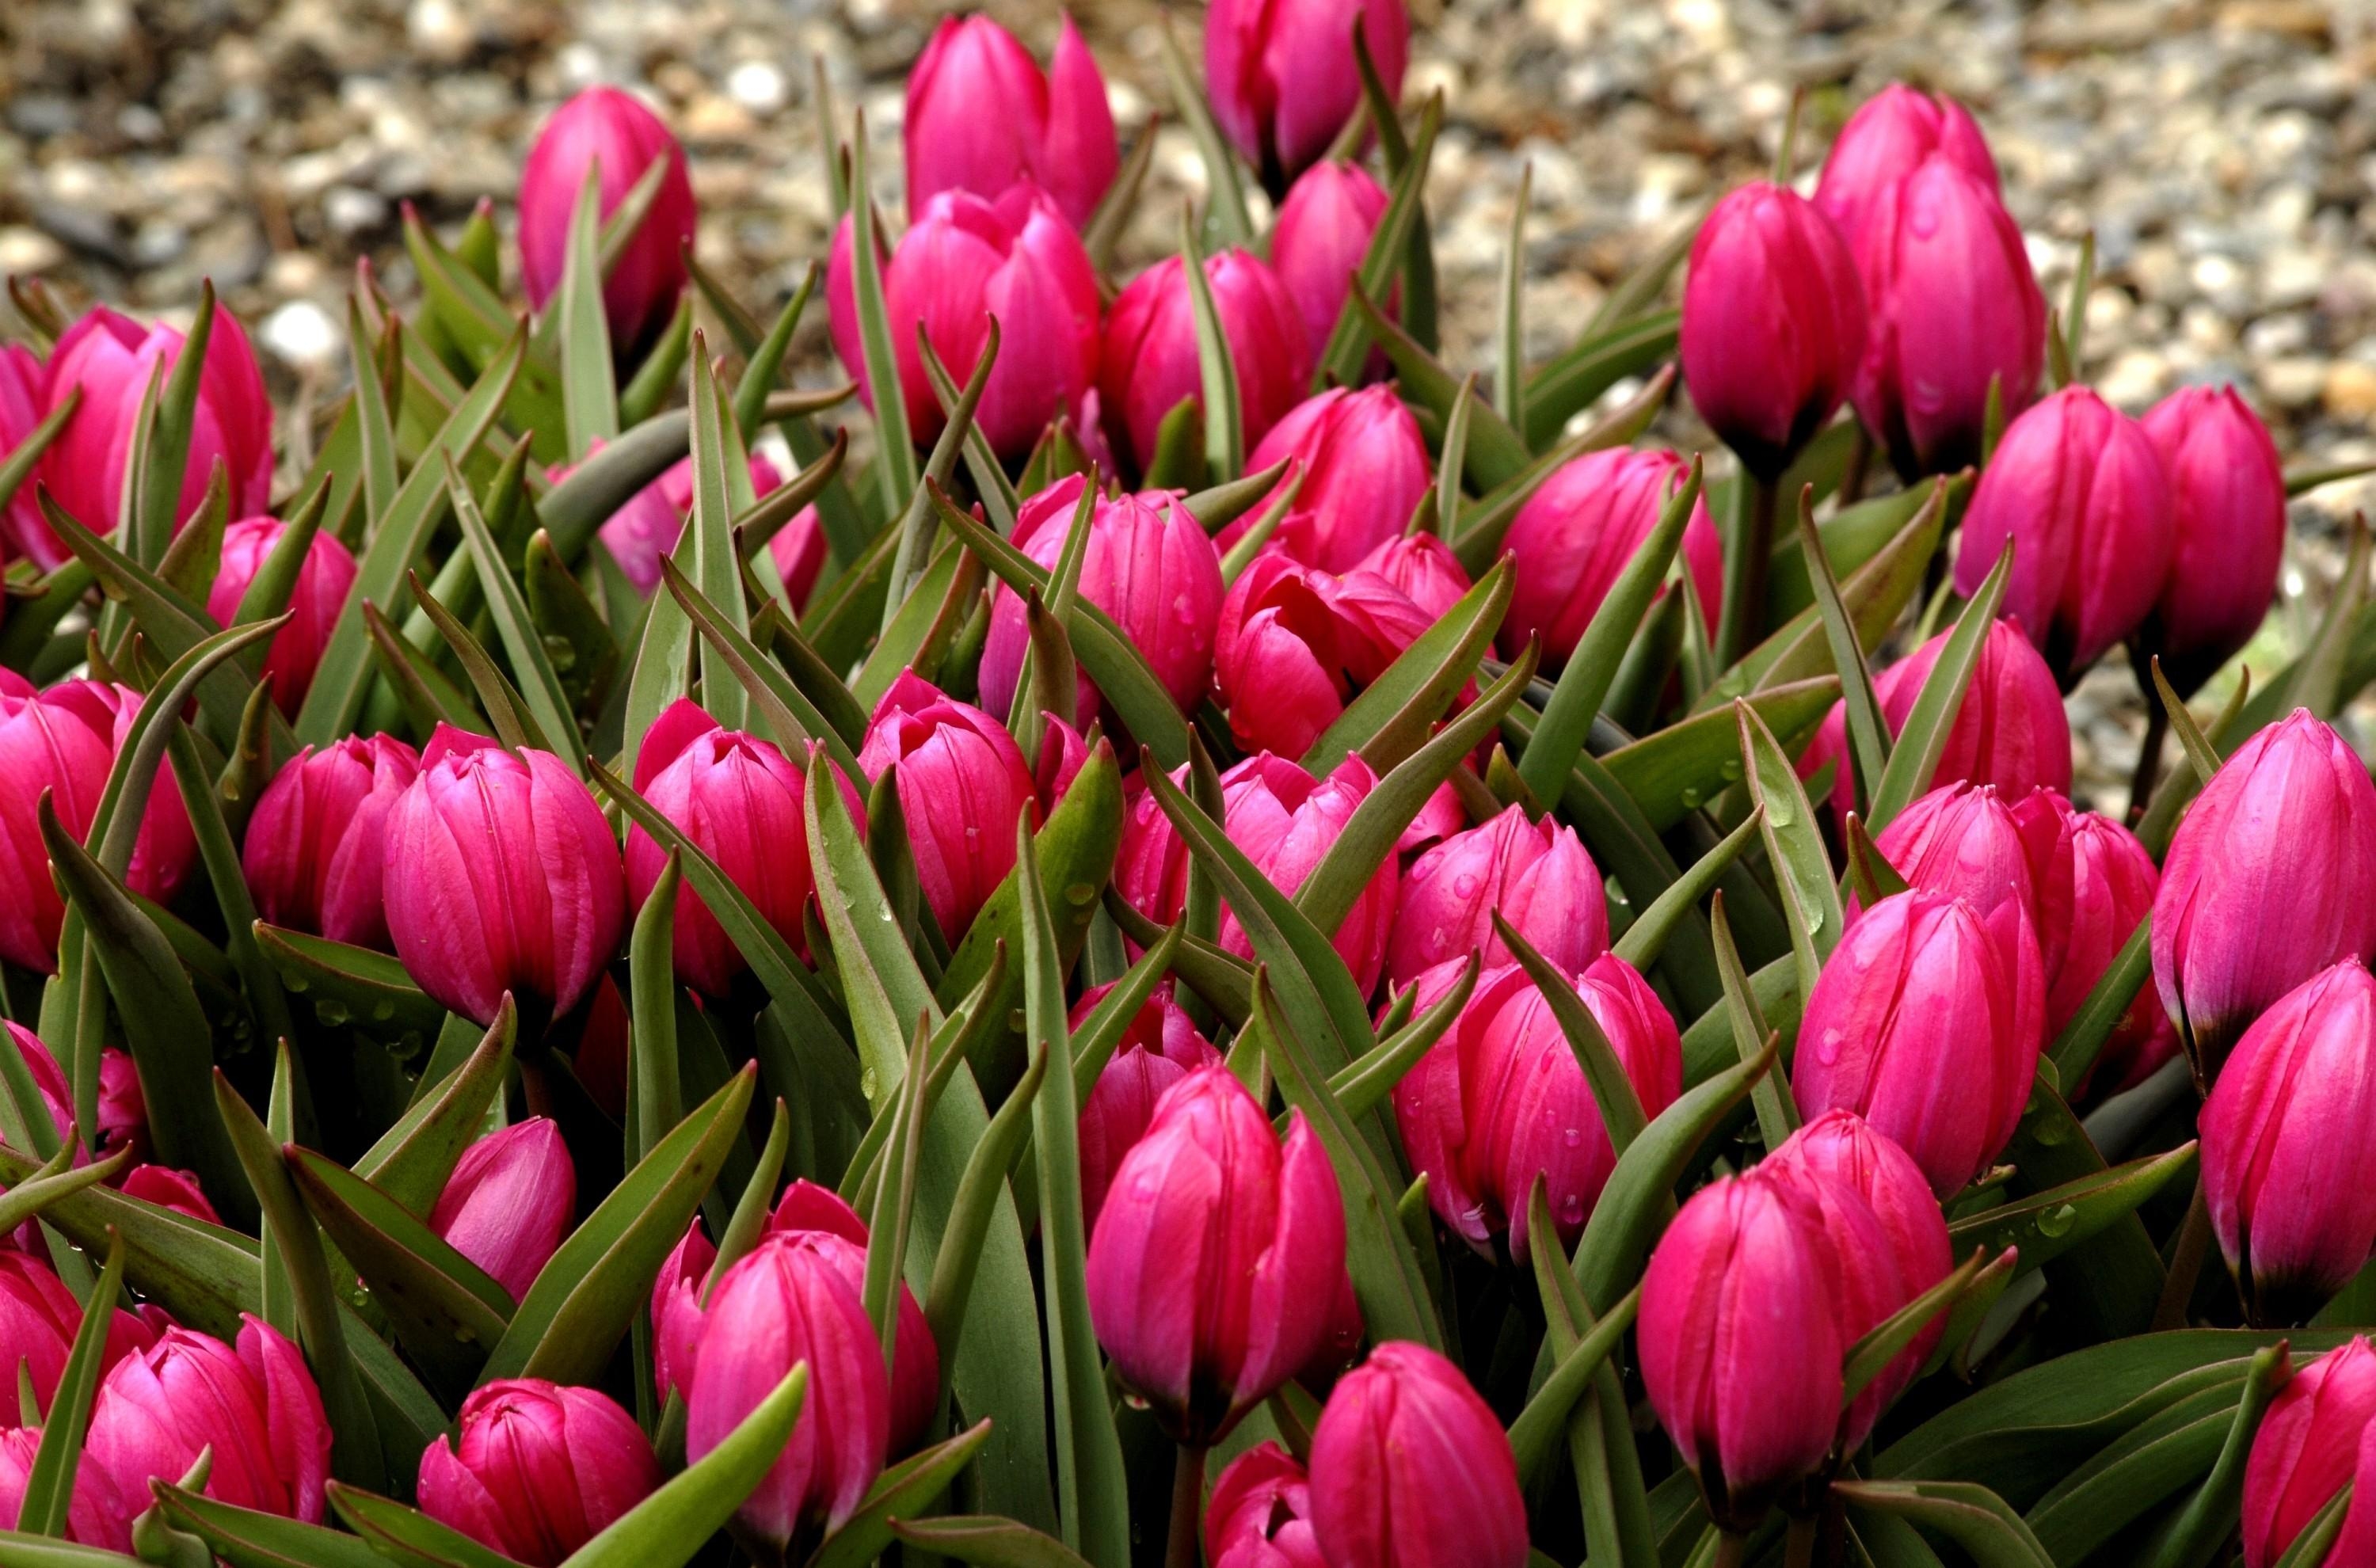 130664 download wallpaper it's beautiful, tulips, flowers, flower bed, flowerbed, buds, handsomely screensavers and pictures for free